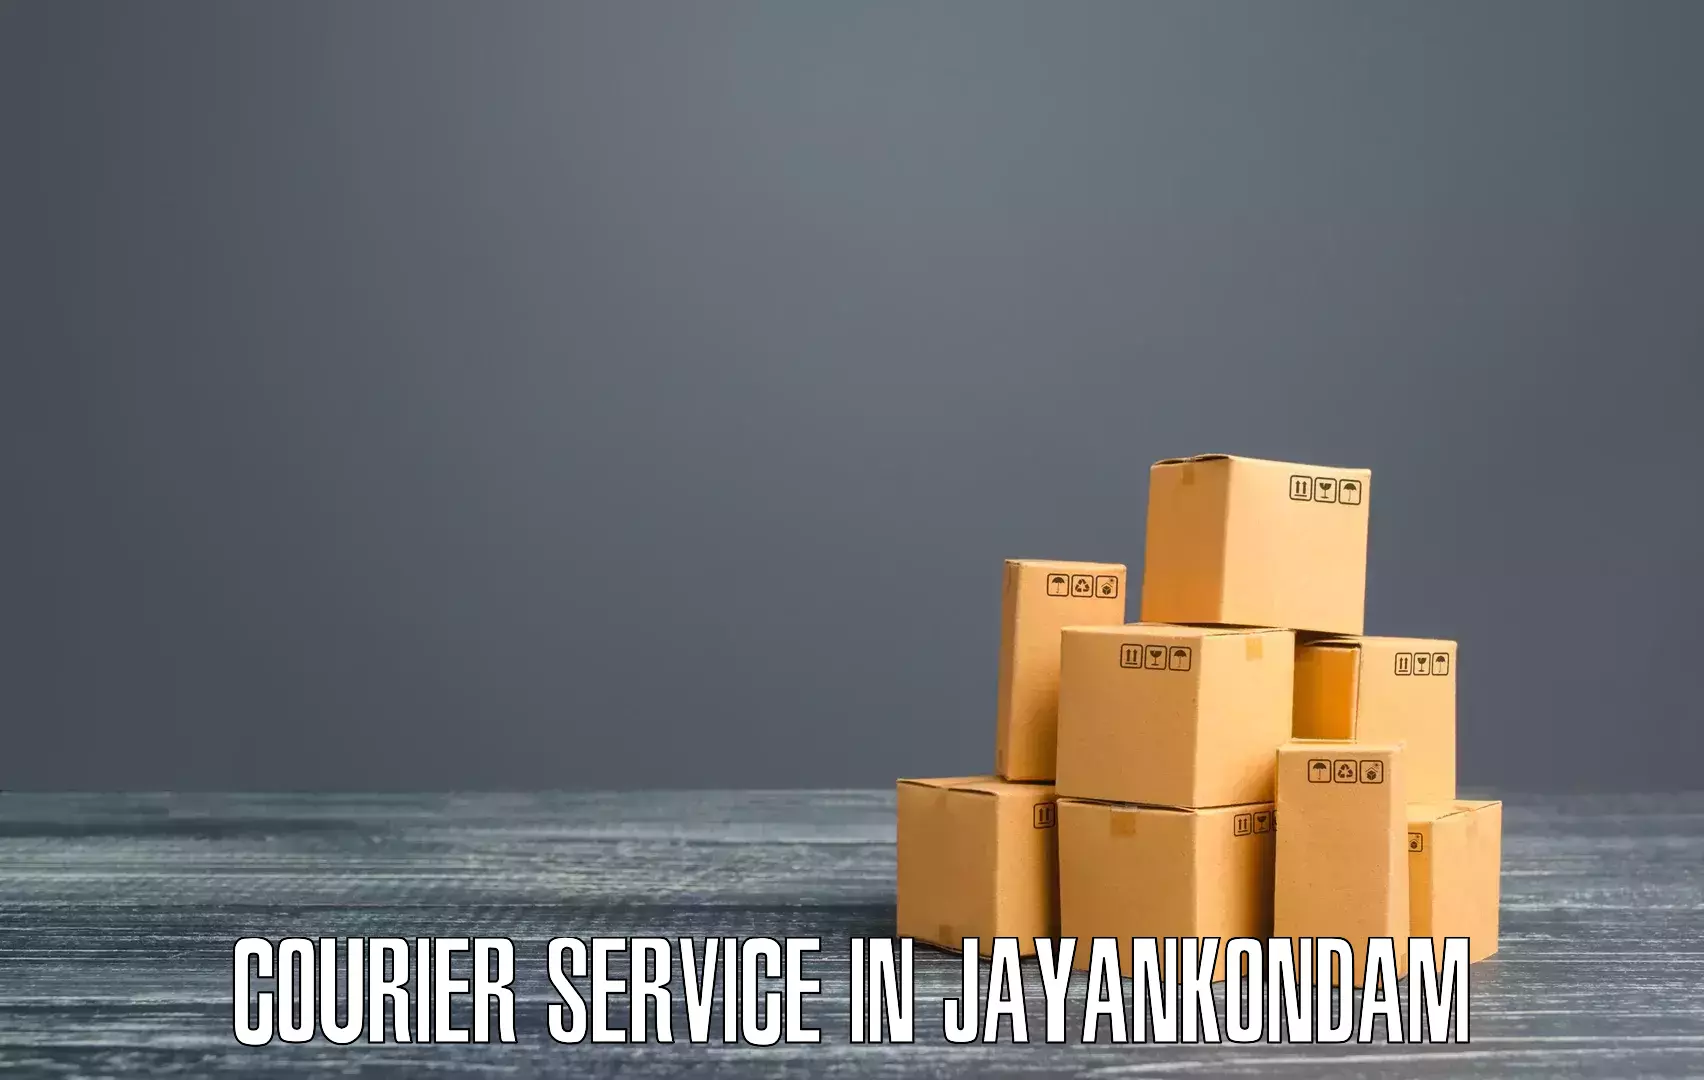 Rural area delivery in Jayankondam